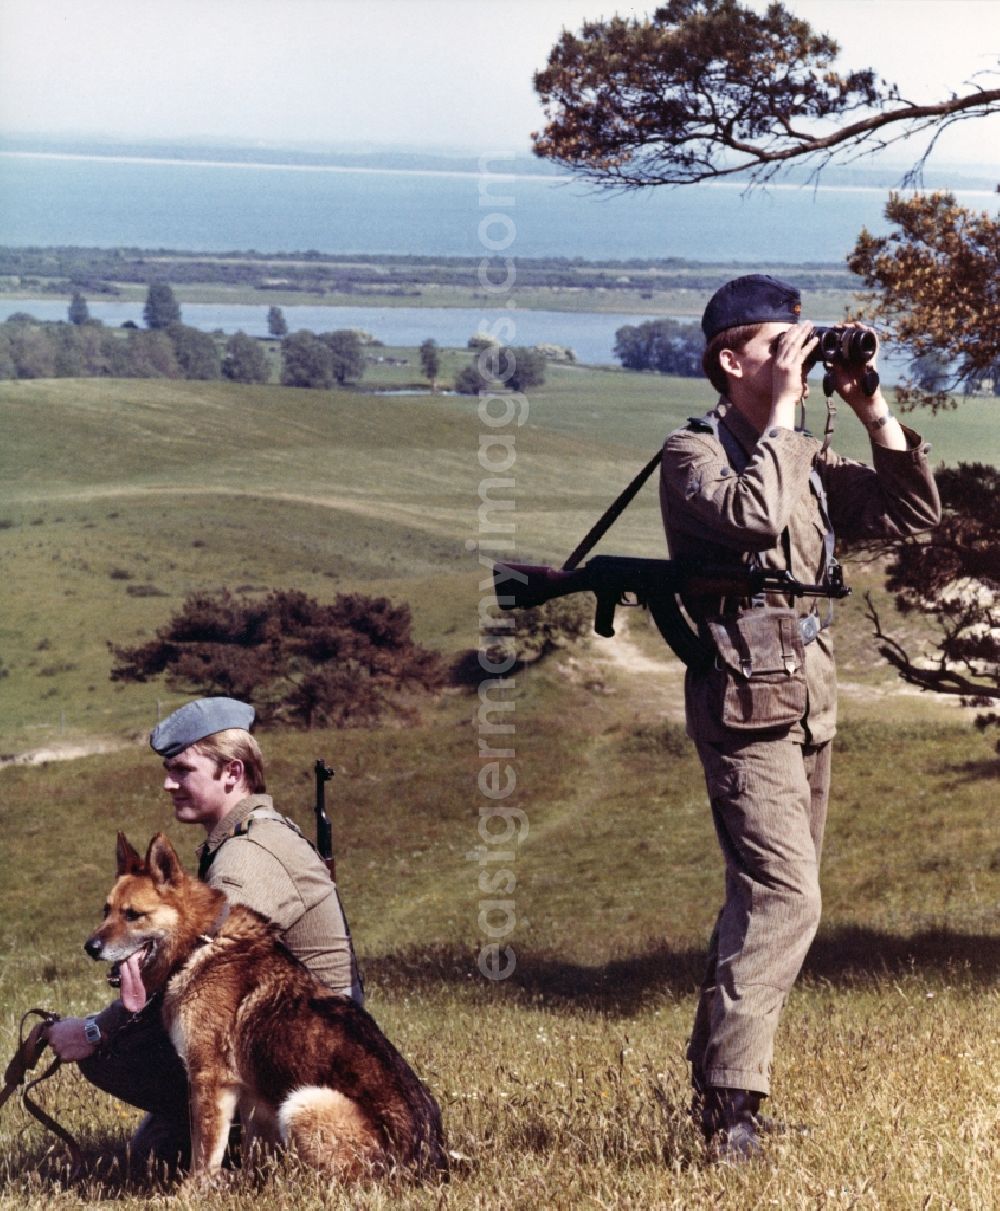 Sassnitz: Landside border control of the Baltic Sea coast by members of the border brigade Coast of East German border guards. Here to see a pair of guards, equipped with machine gun AK-47